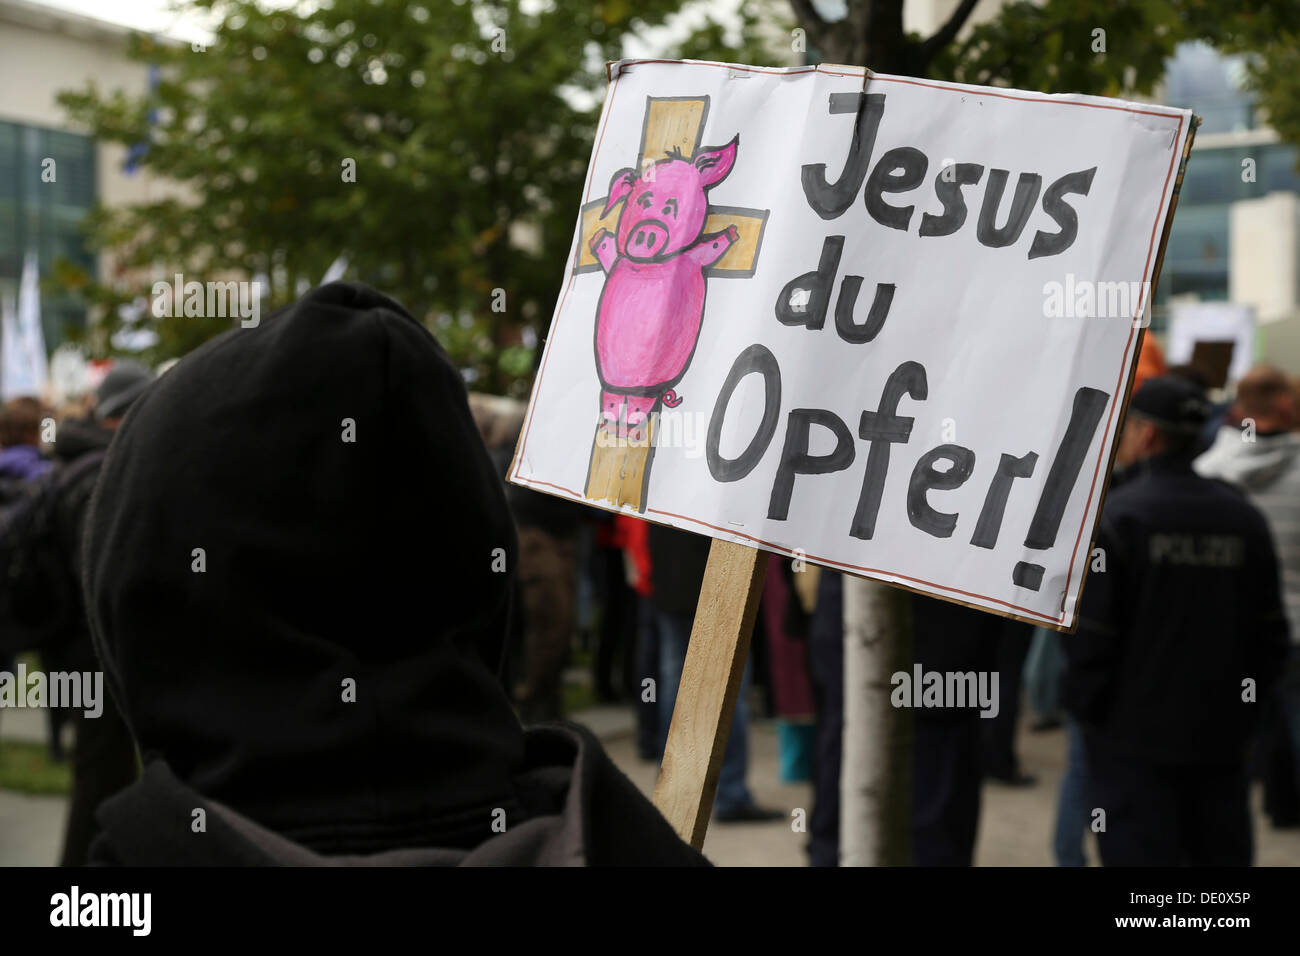 Sign, lettering 'Jesus du Opfer', German for 'Jesus, you are the victim', protest against Christian fundamentalism and for the Stock Photo